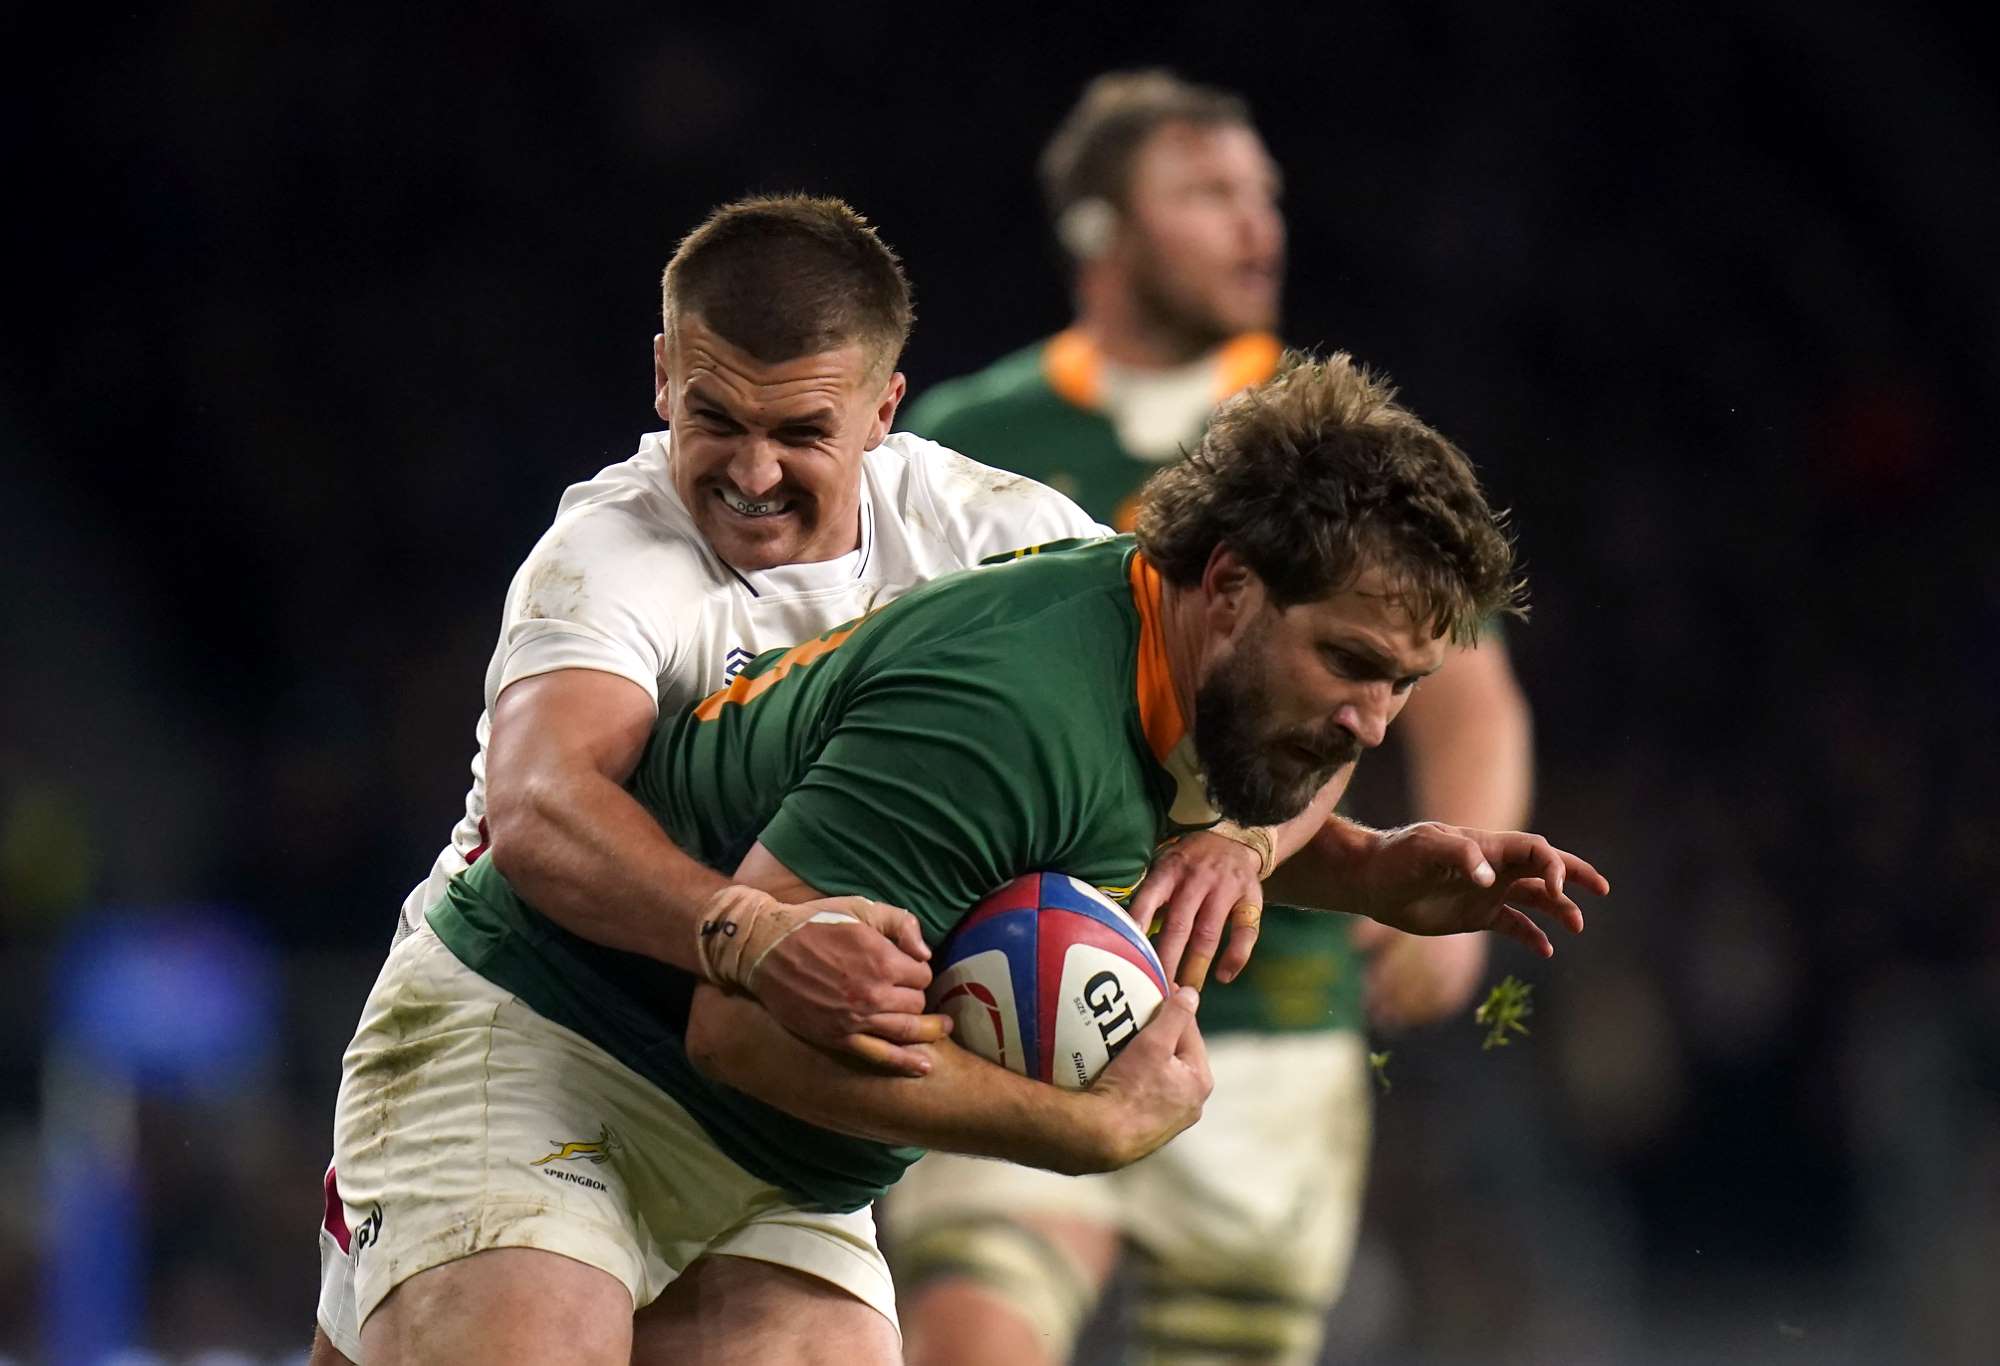 South Africa's Frans Steyn is tackled by England's Henry Slade